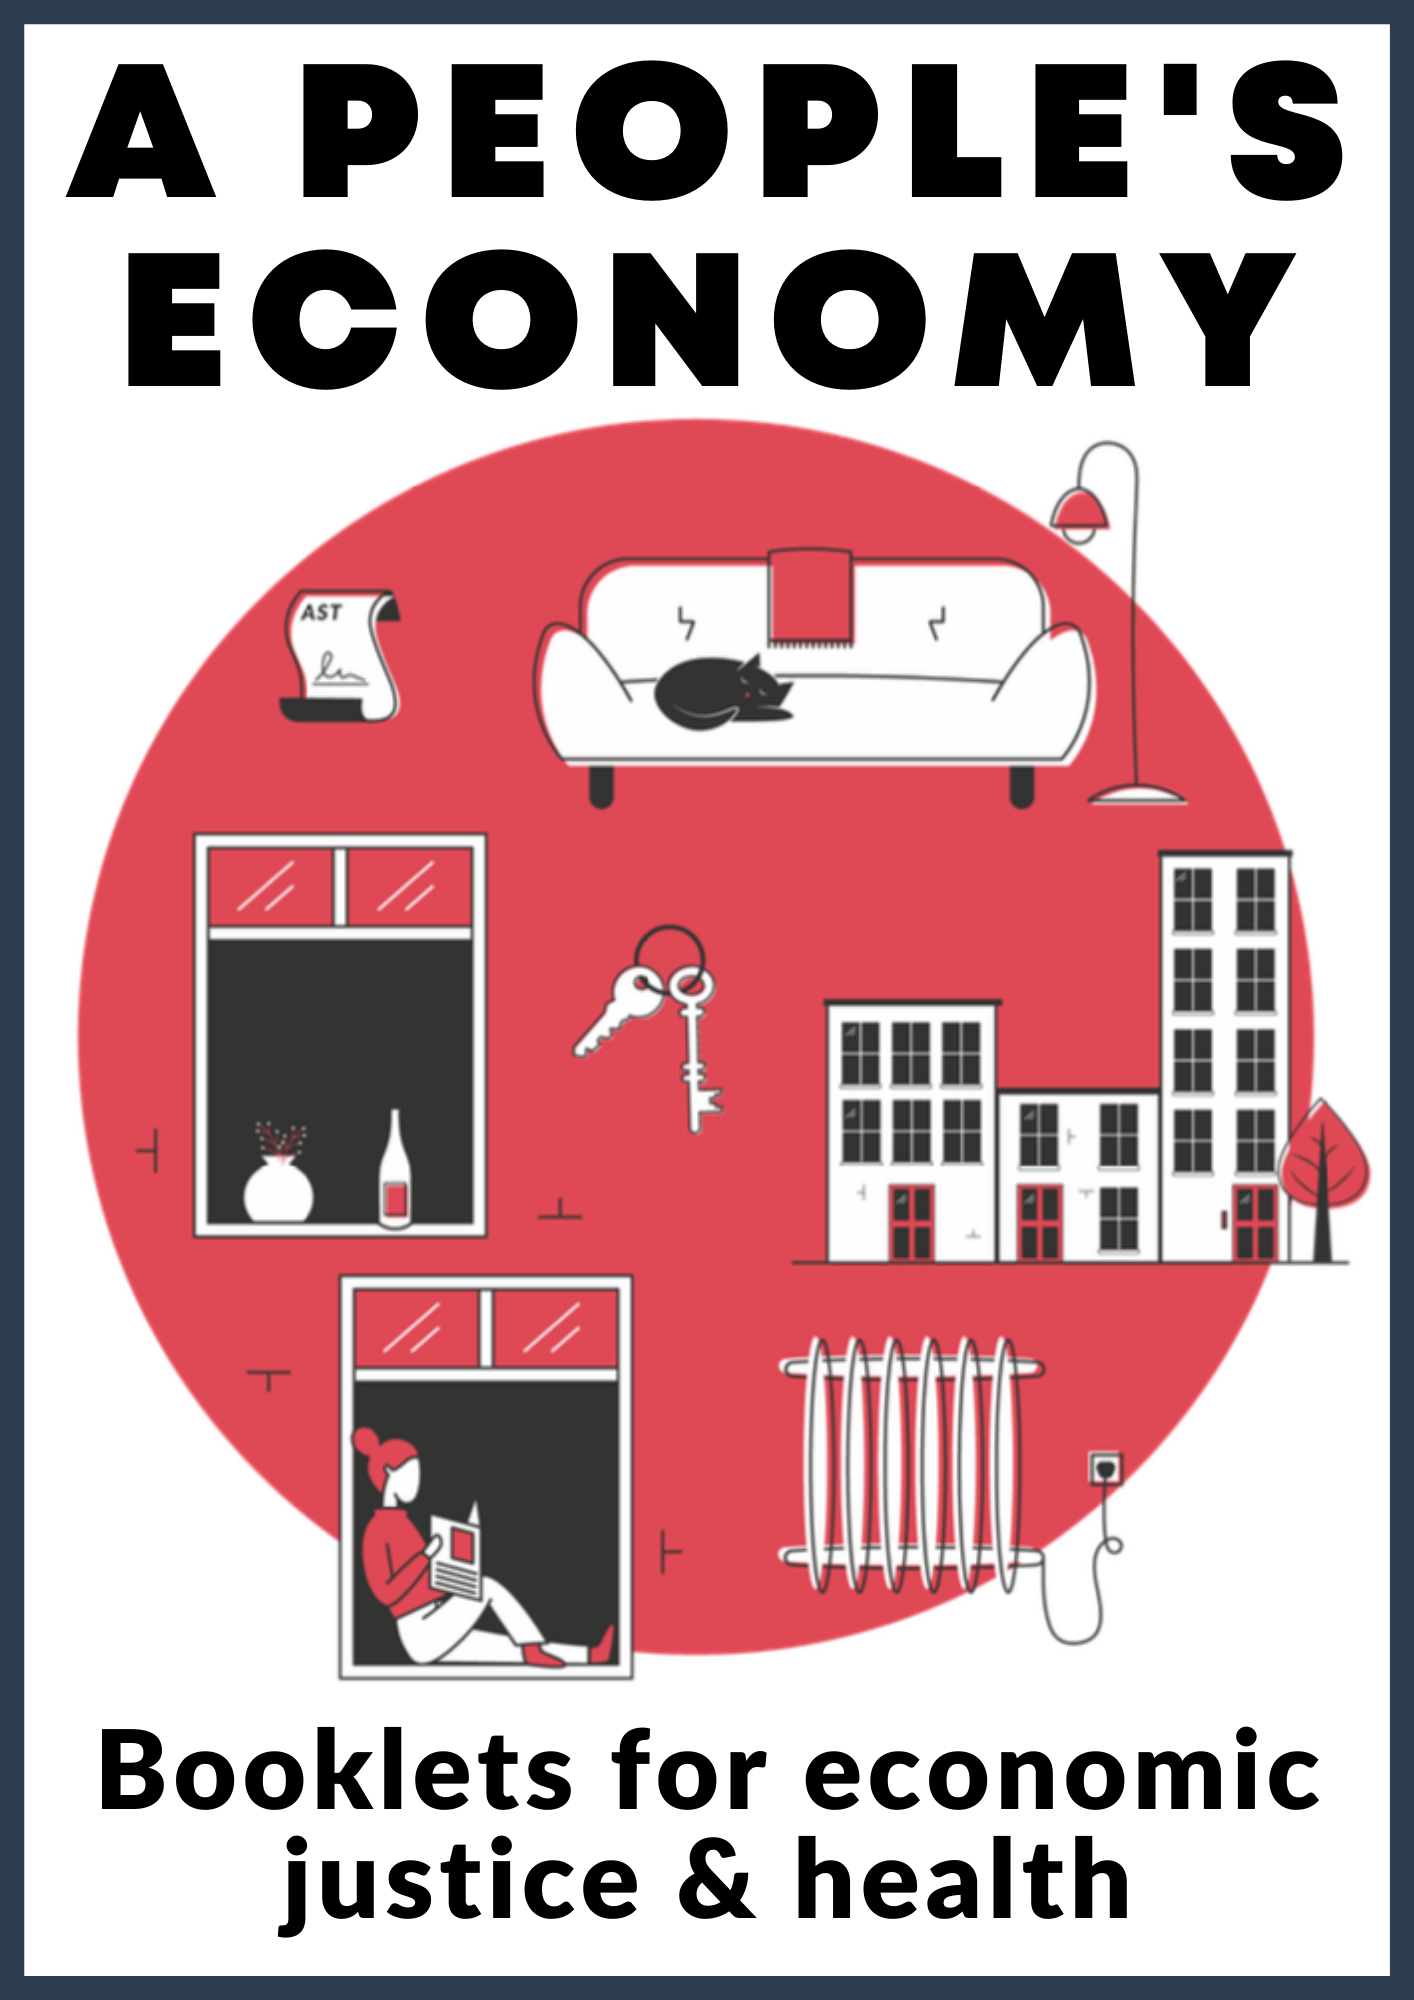 A People's Economy – Booklets for economic justice & health